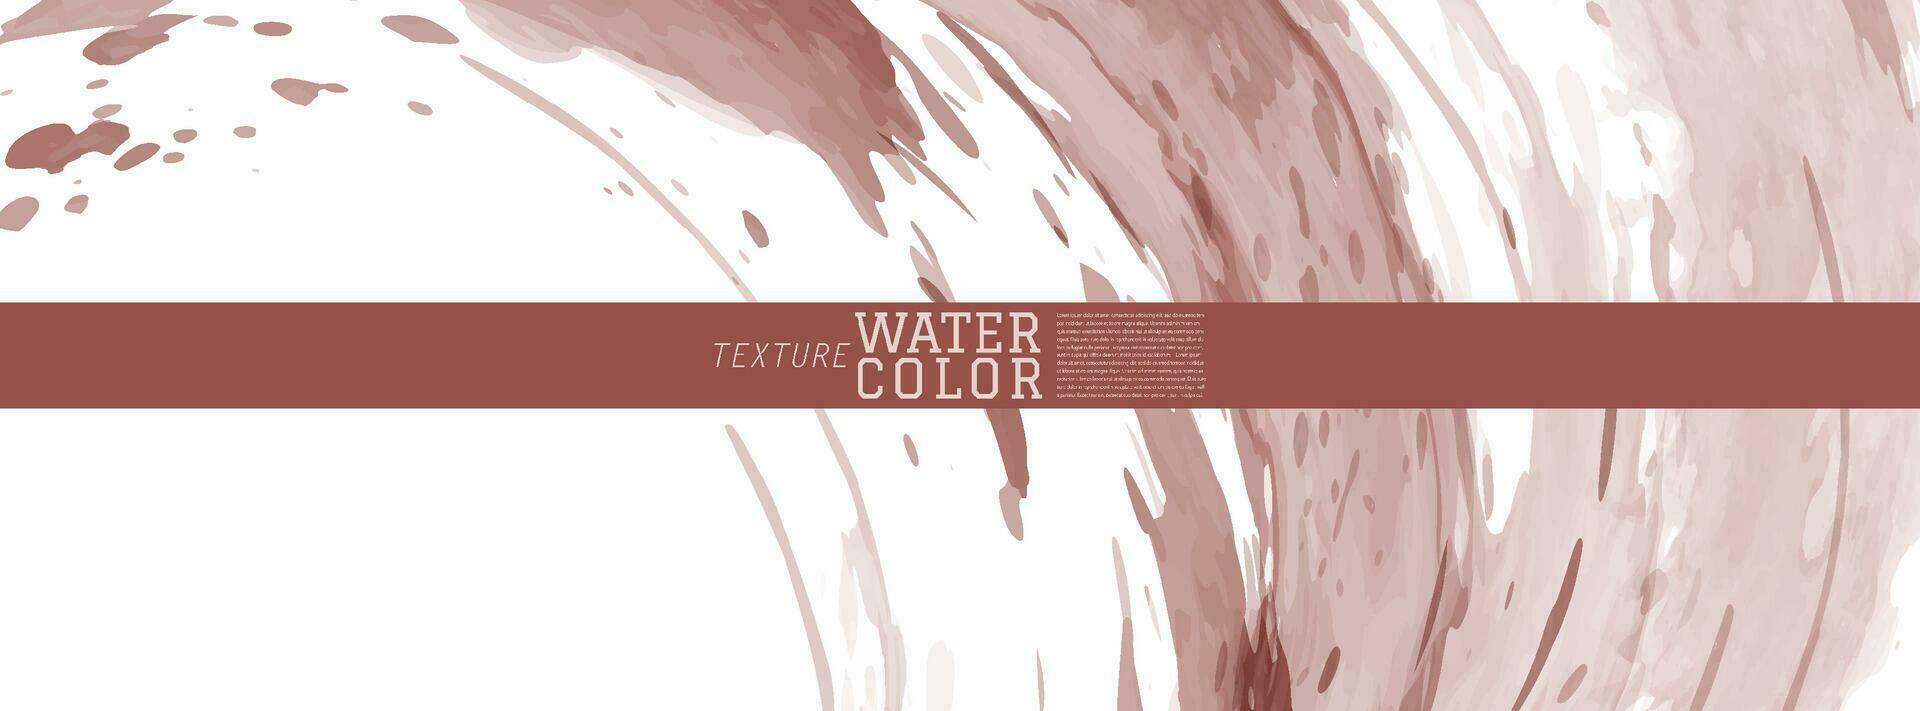 Red Earth tone watercolor splash background vector